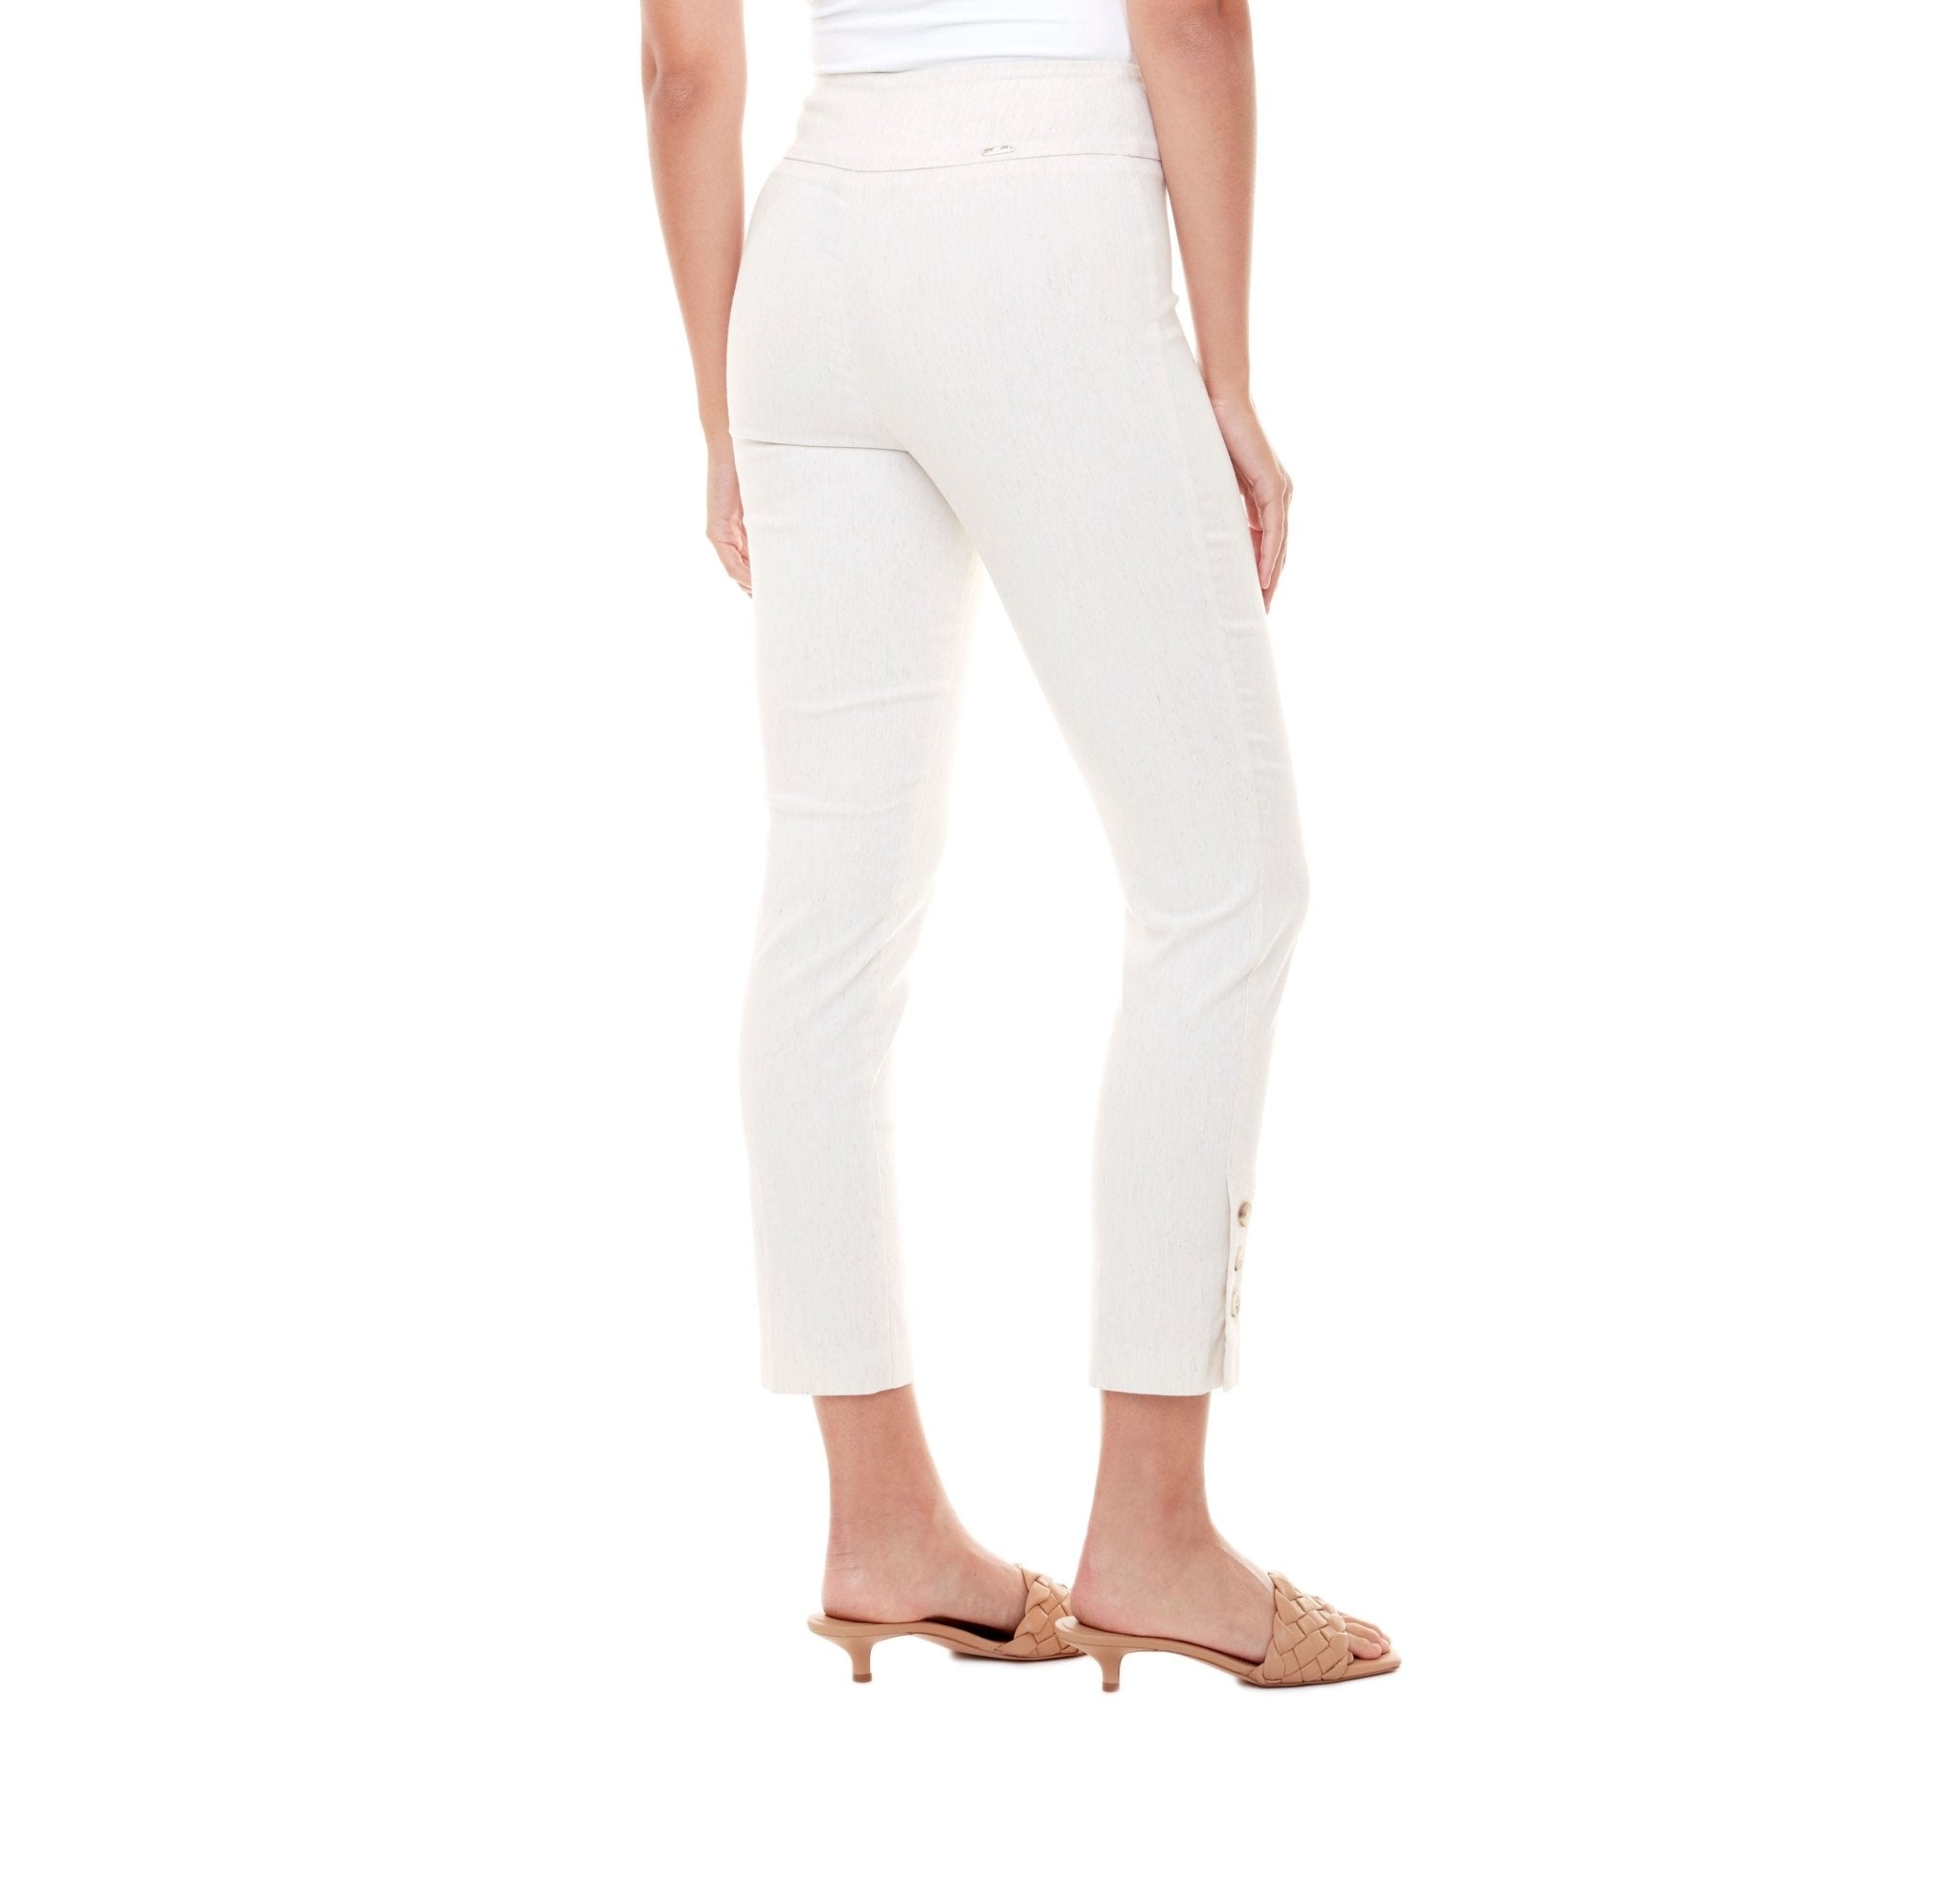 Shop Linen Slim Leg Pant with Button Detail by Up! - Up Pants